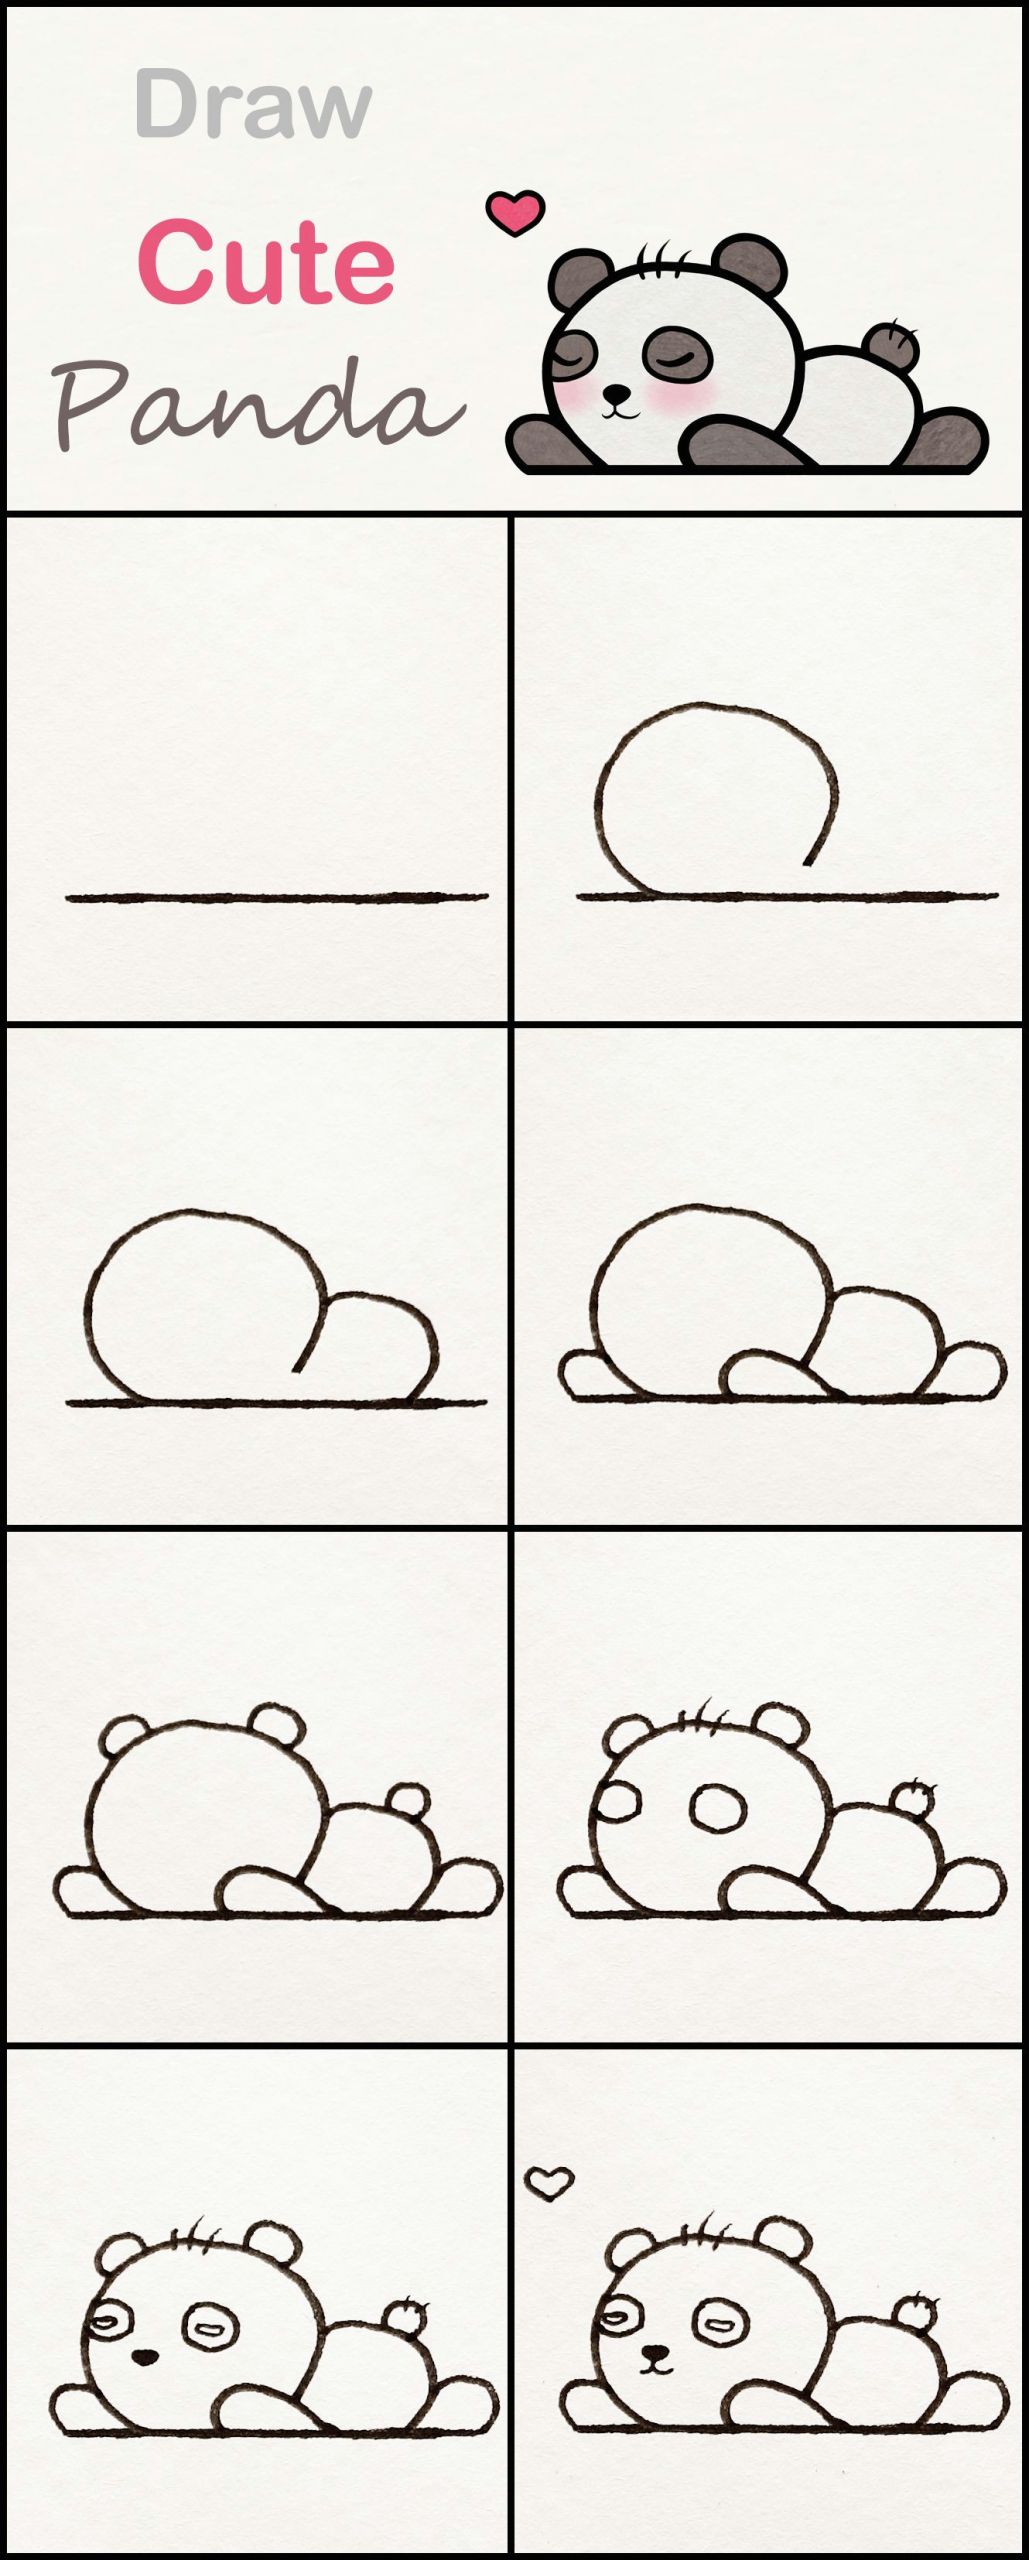 Easy Drawing Lessons Step by Step Learn How to Draw A Cute Baby Panda Step by Step A Very